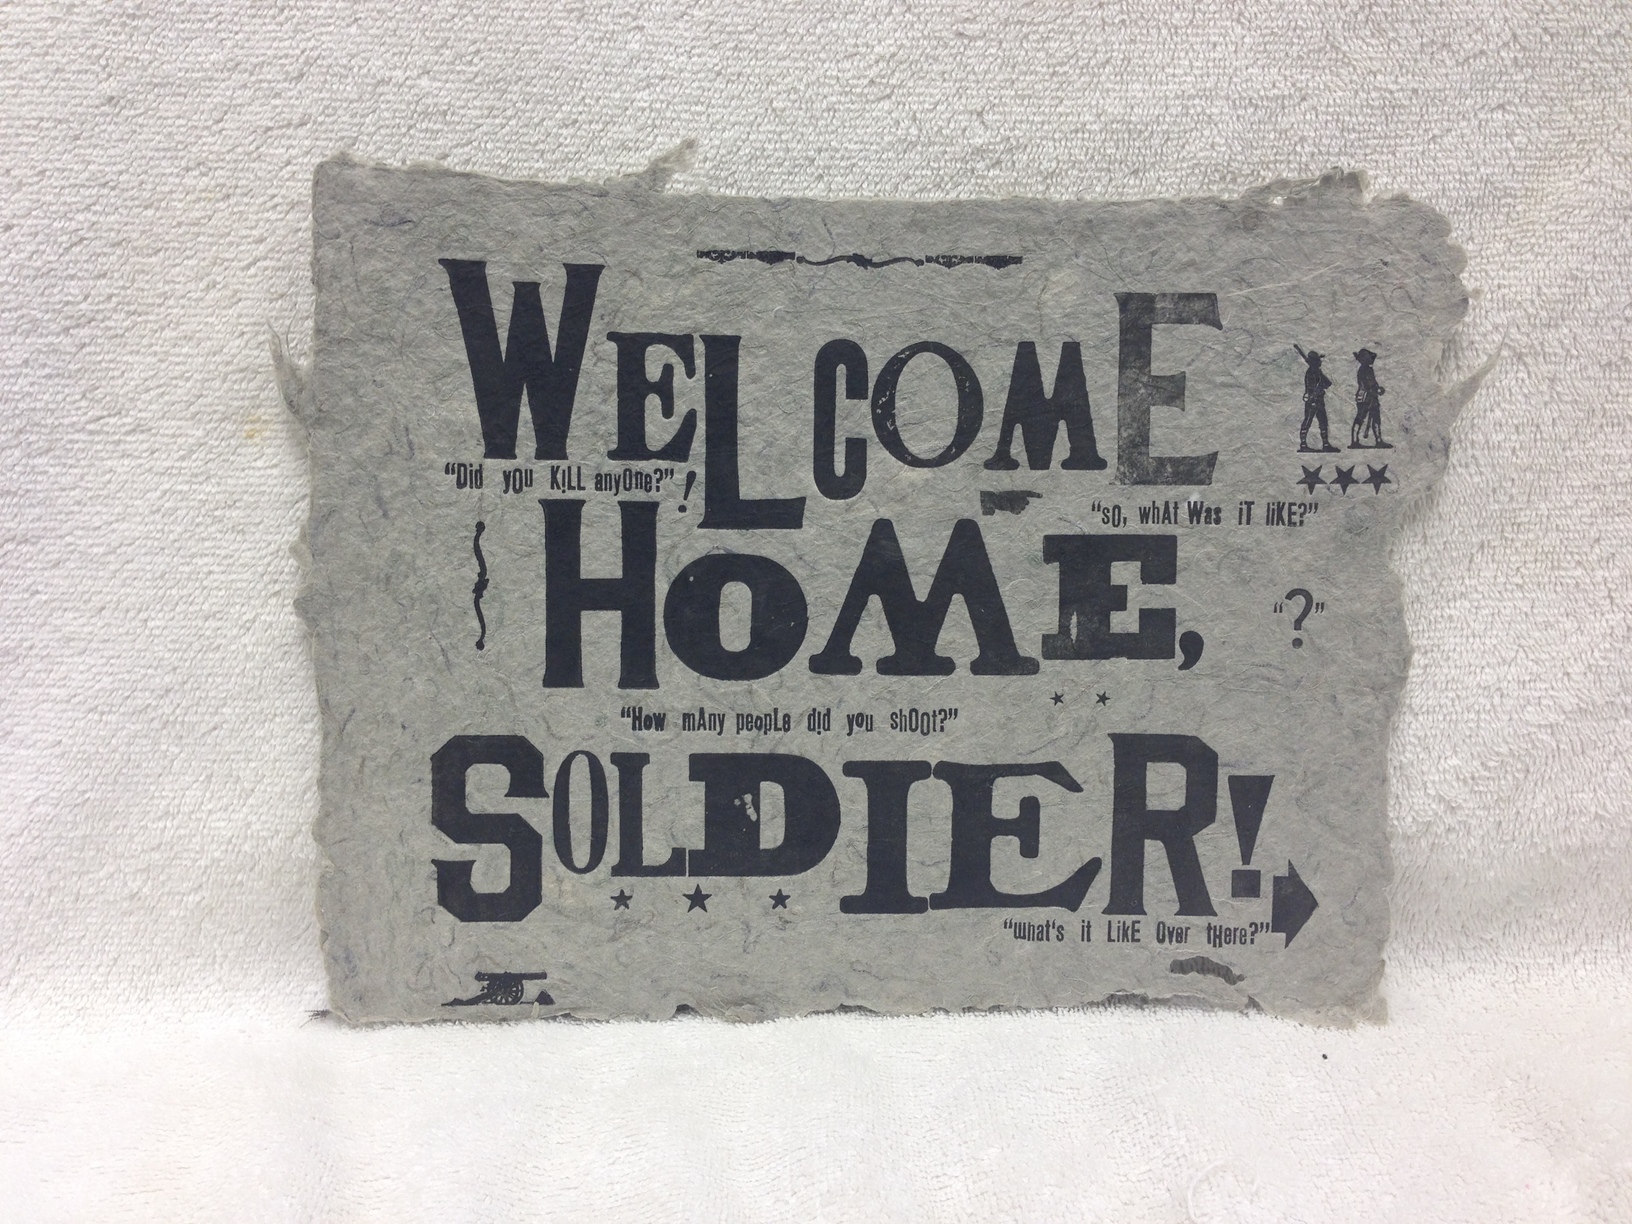 Eli Wright Army - Iraq _Welcome Home Soldier_ 2011 Letterpress on Handmade Paper from military uniforms 8 x 11 PCNJ IMG_0946JPG.jpg